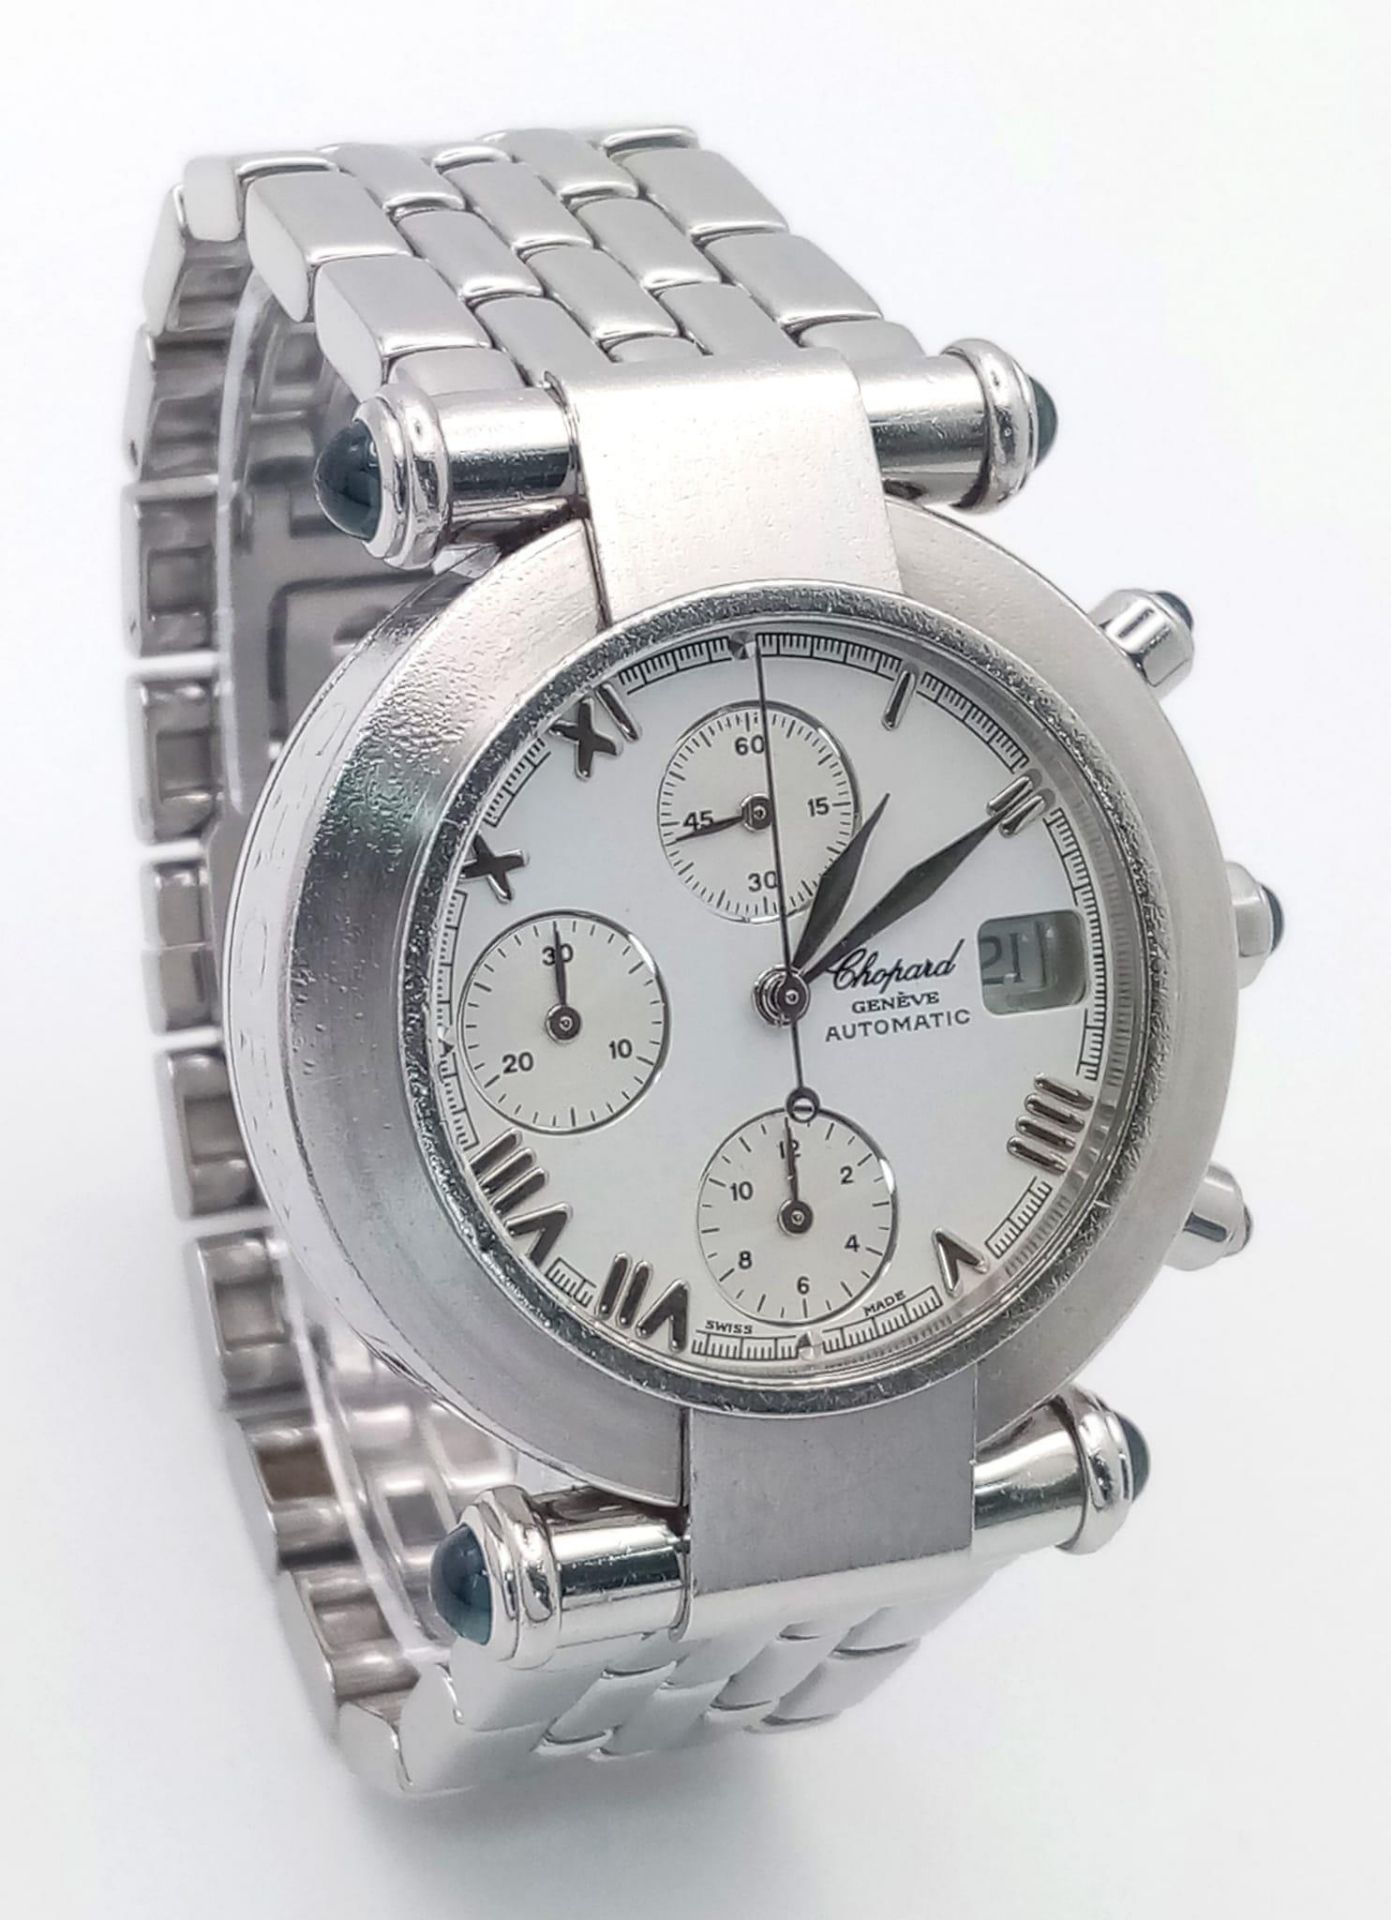 A Chopard Automatic Chronograph Gents Watch. Stainless steel bracelet and case - 37mm. White dial - Image 3 of 8